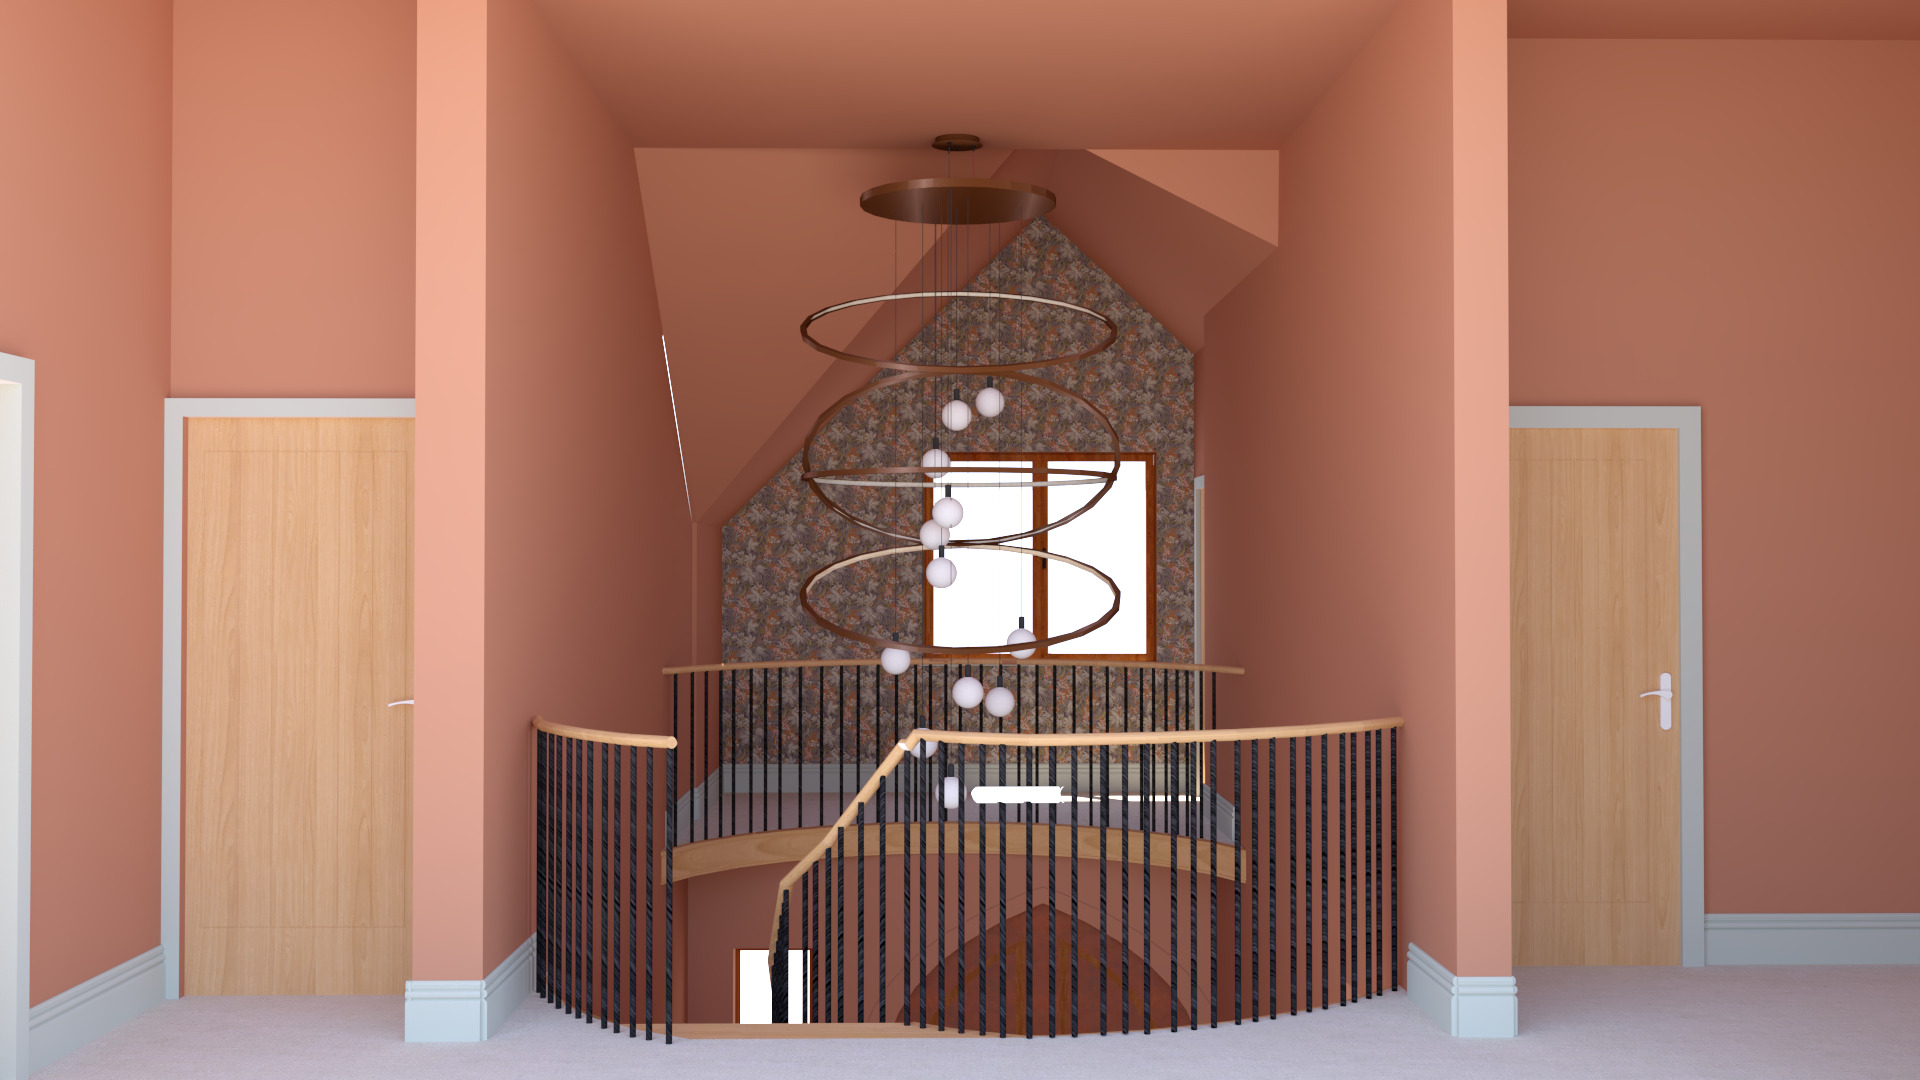 A computer generated model of the chandelier in the hallway space.